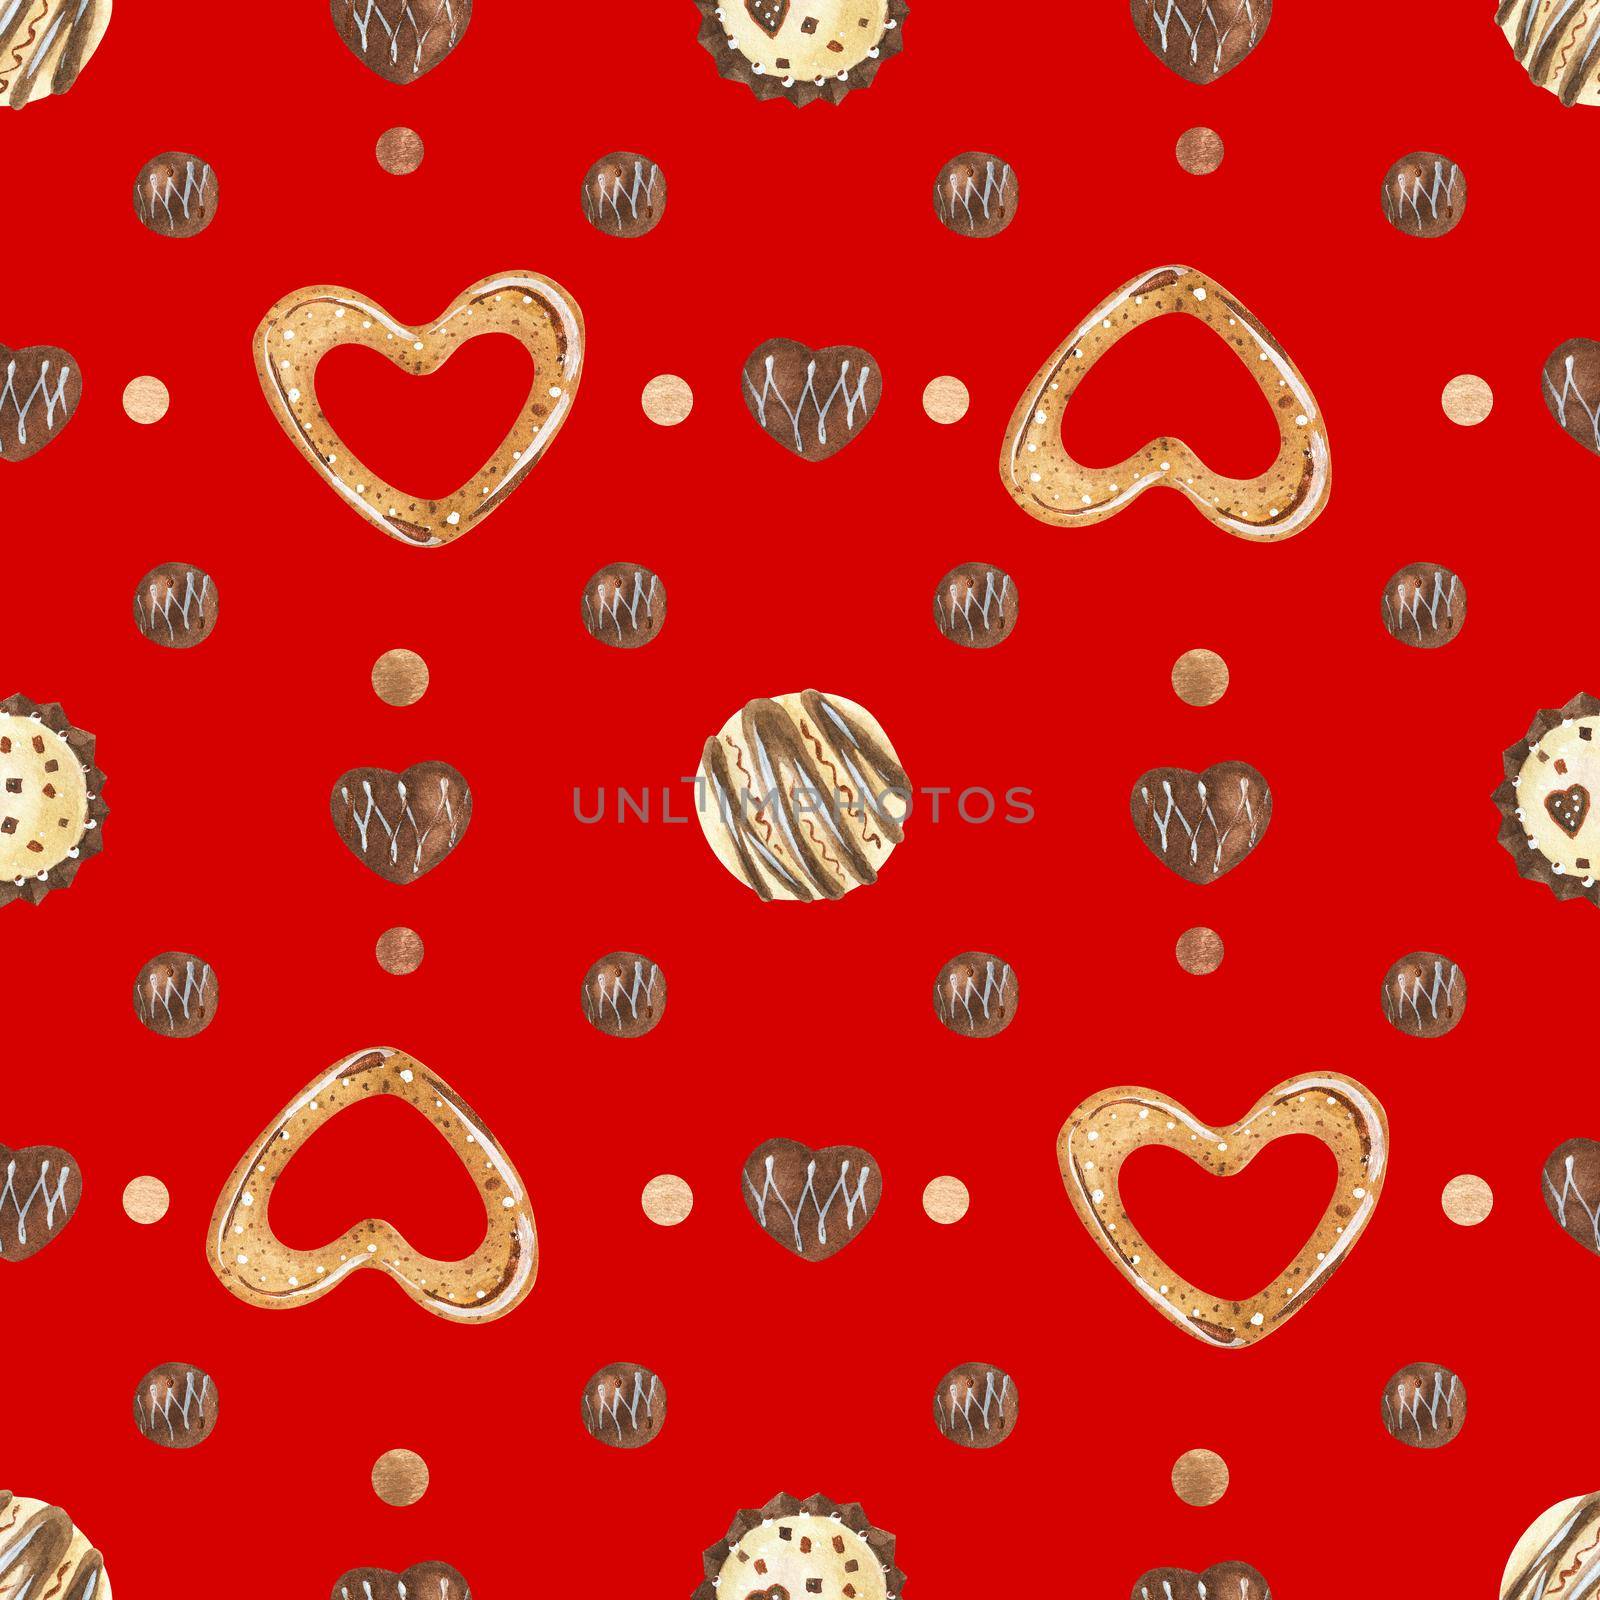 Sweet Valentine seamless pattern with chocolate candies and cookies. Watercolor illustration for any event decoration, red background, path included